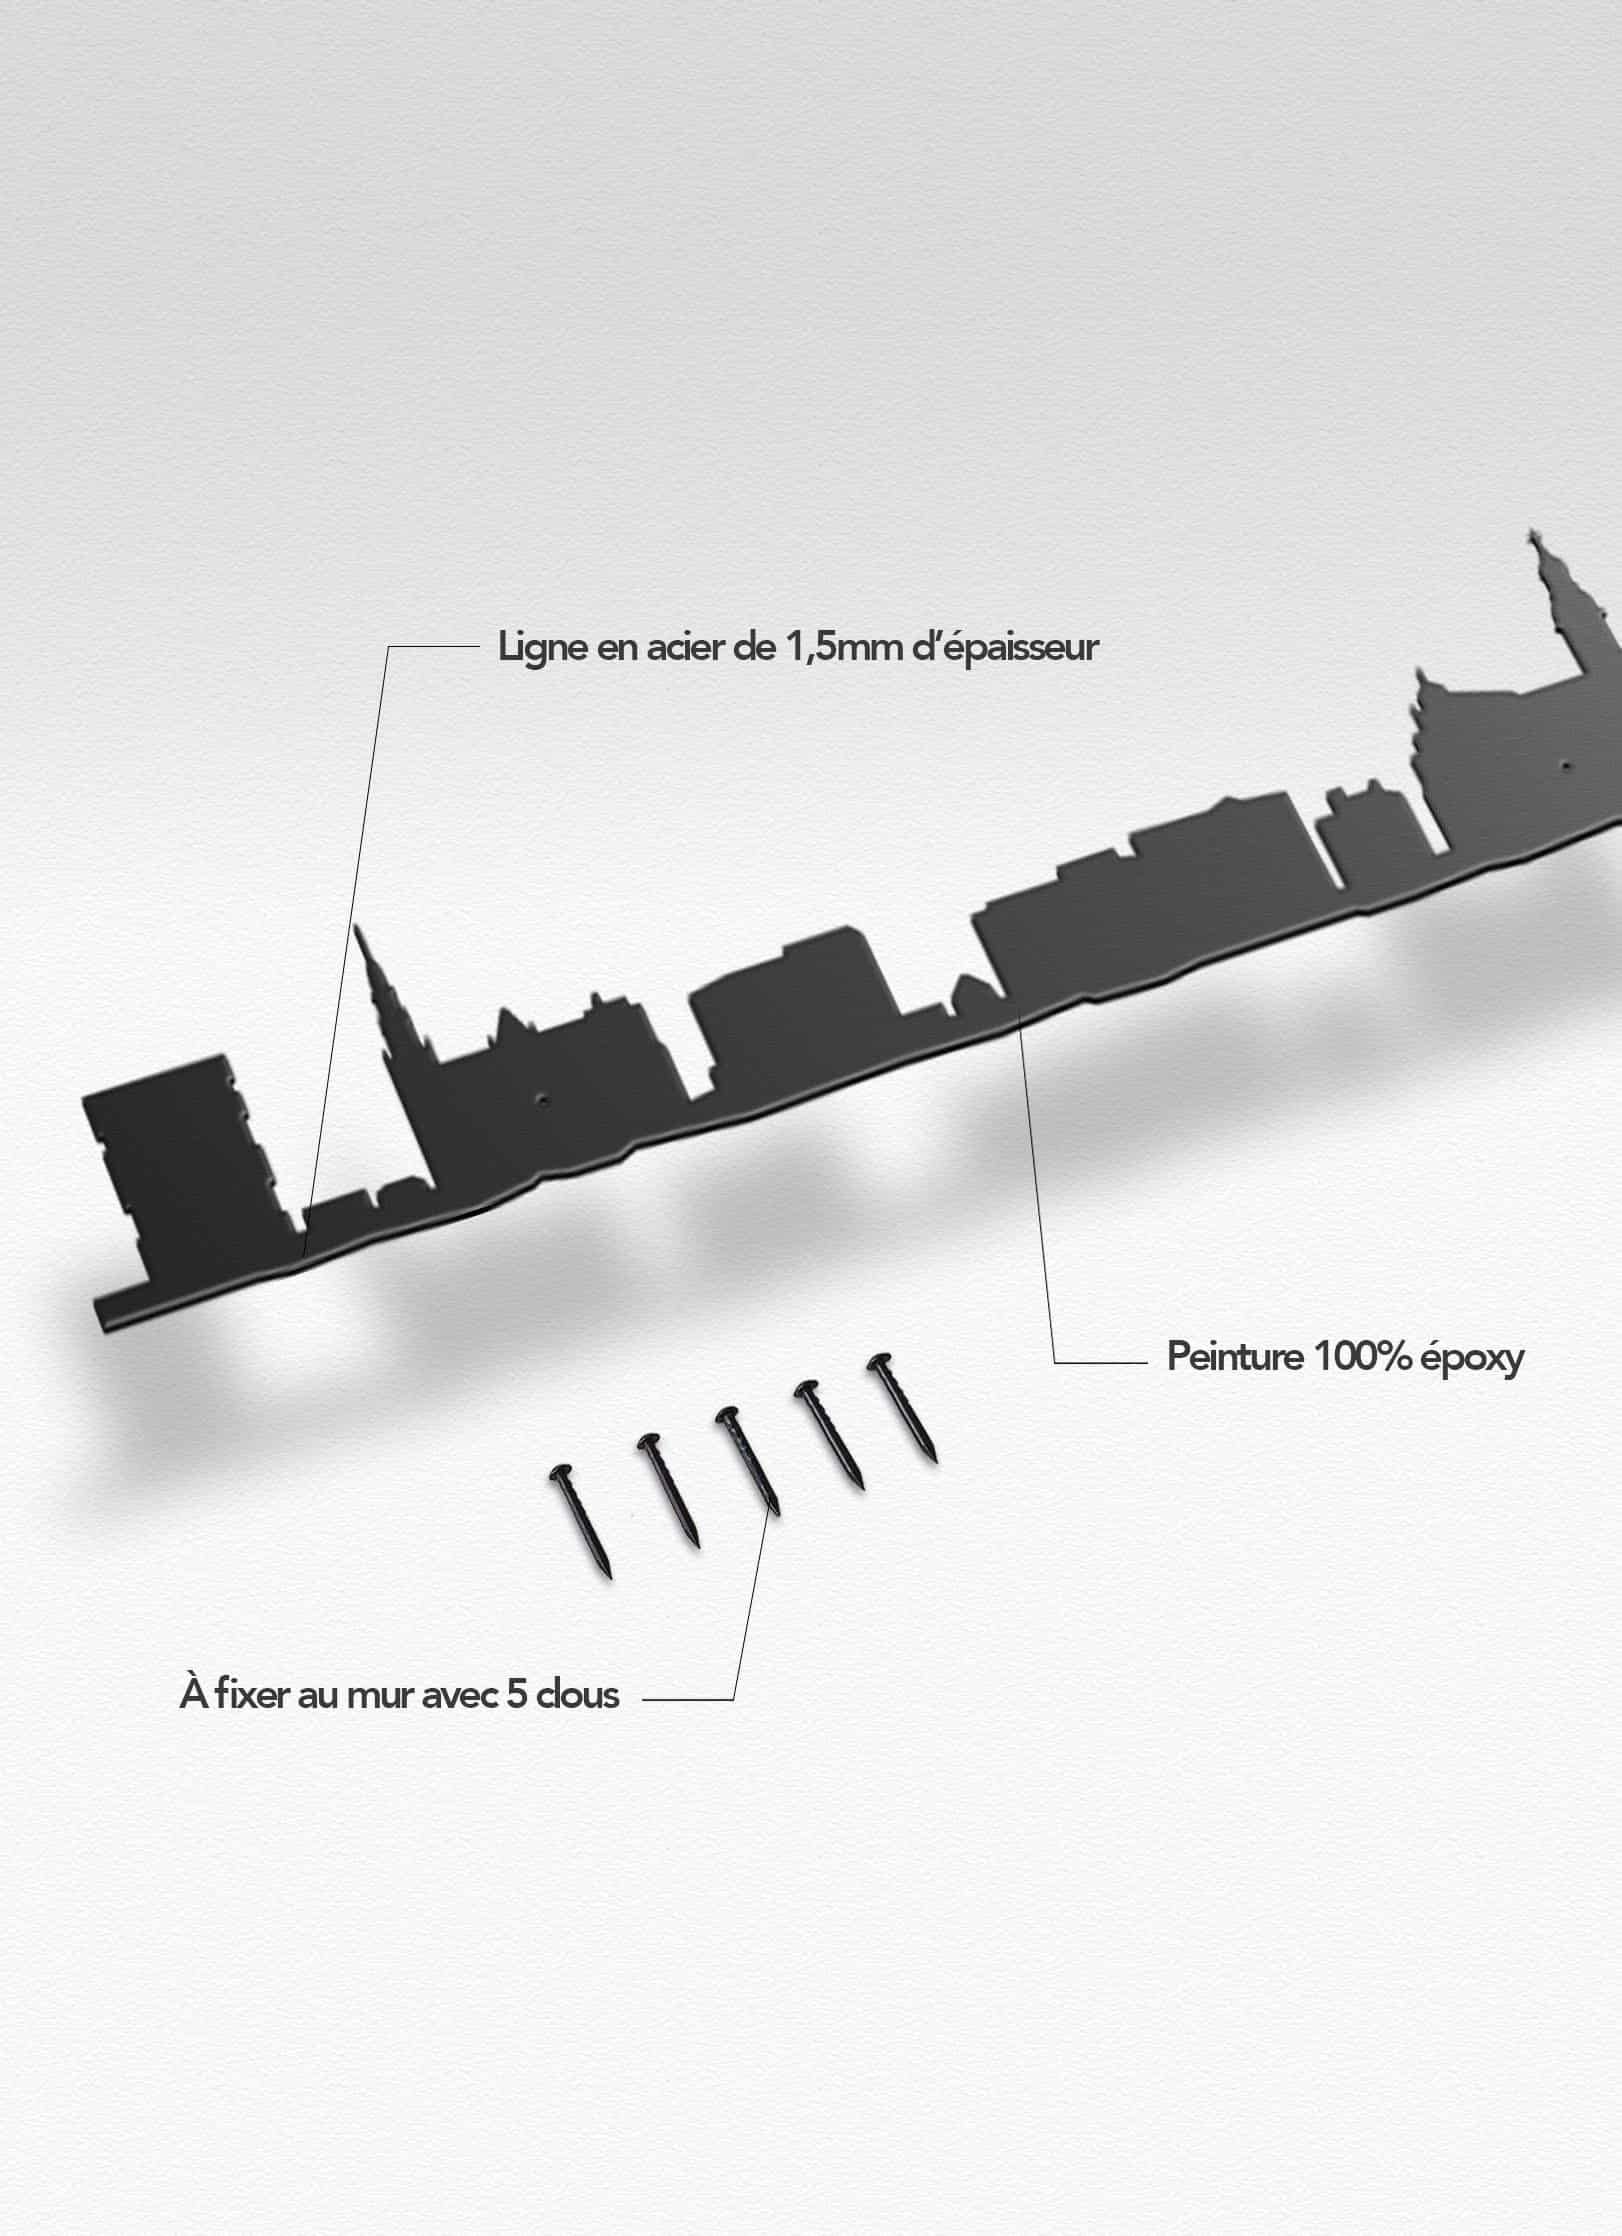 Presentation of the skyline of Anvers XL